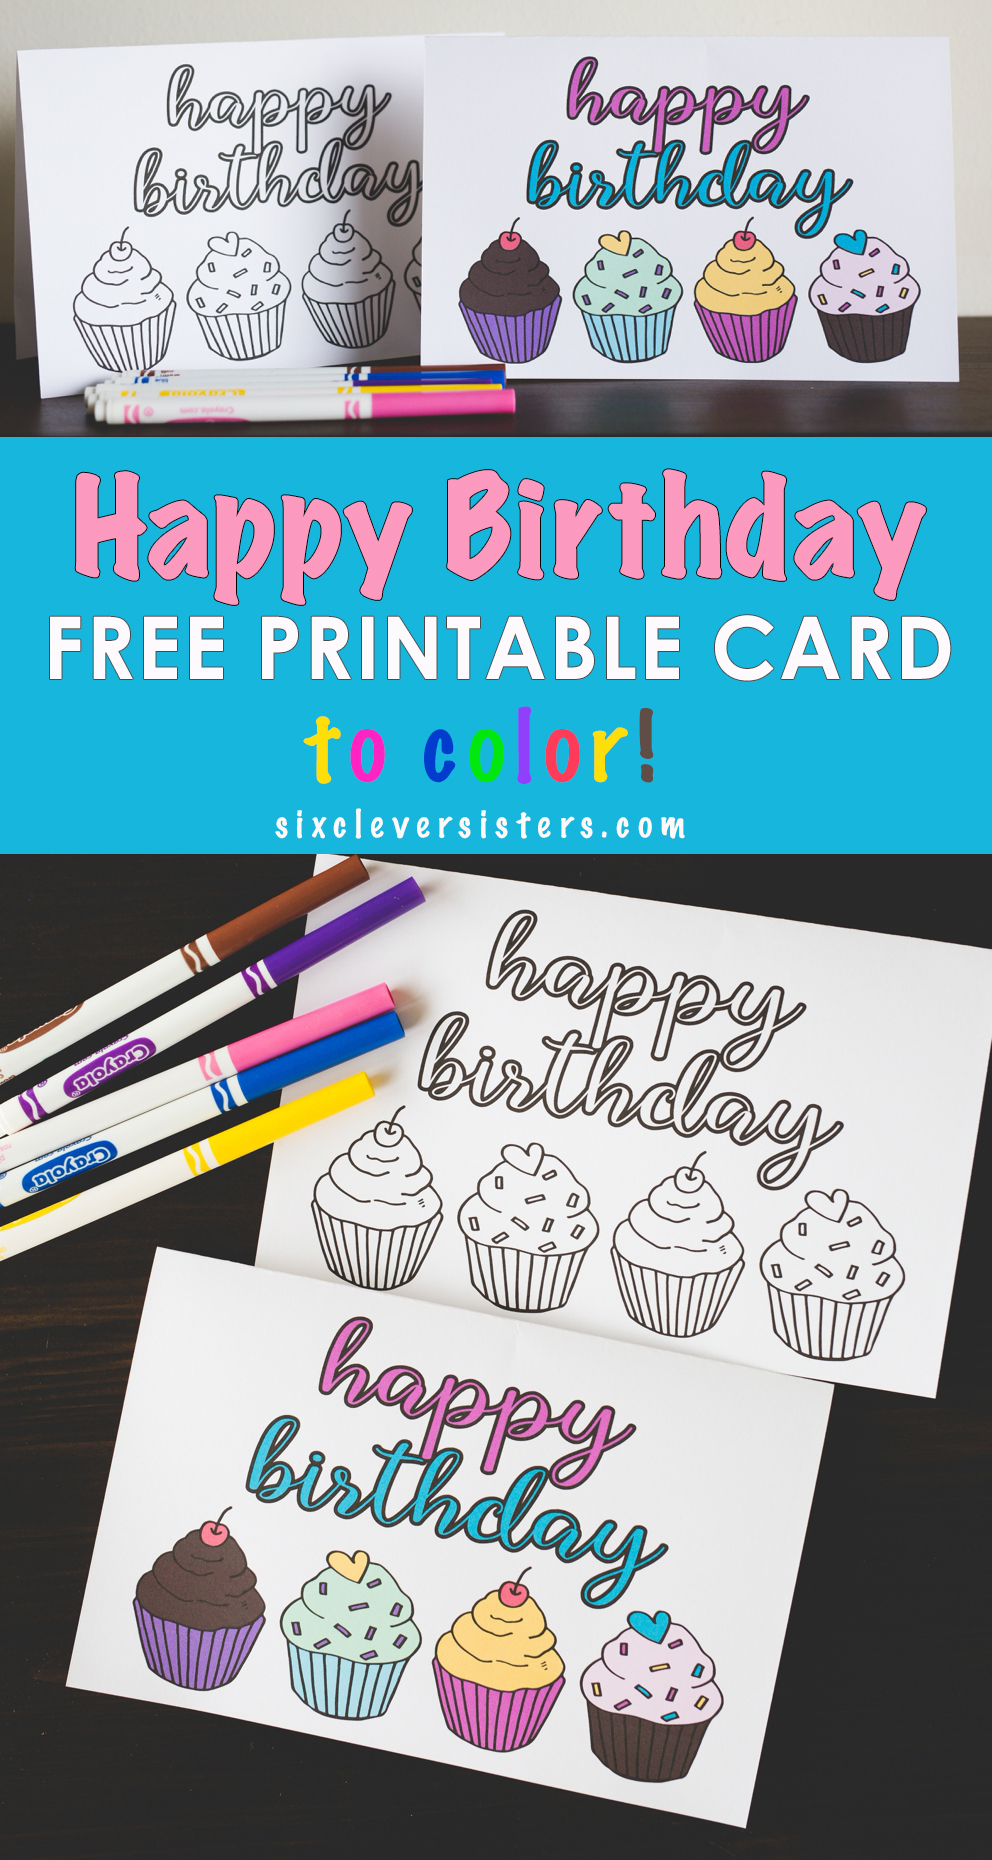 free-printable-happy-birthday-card-six-clever-sisters